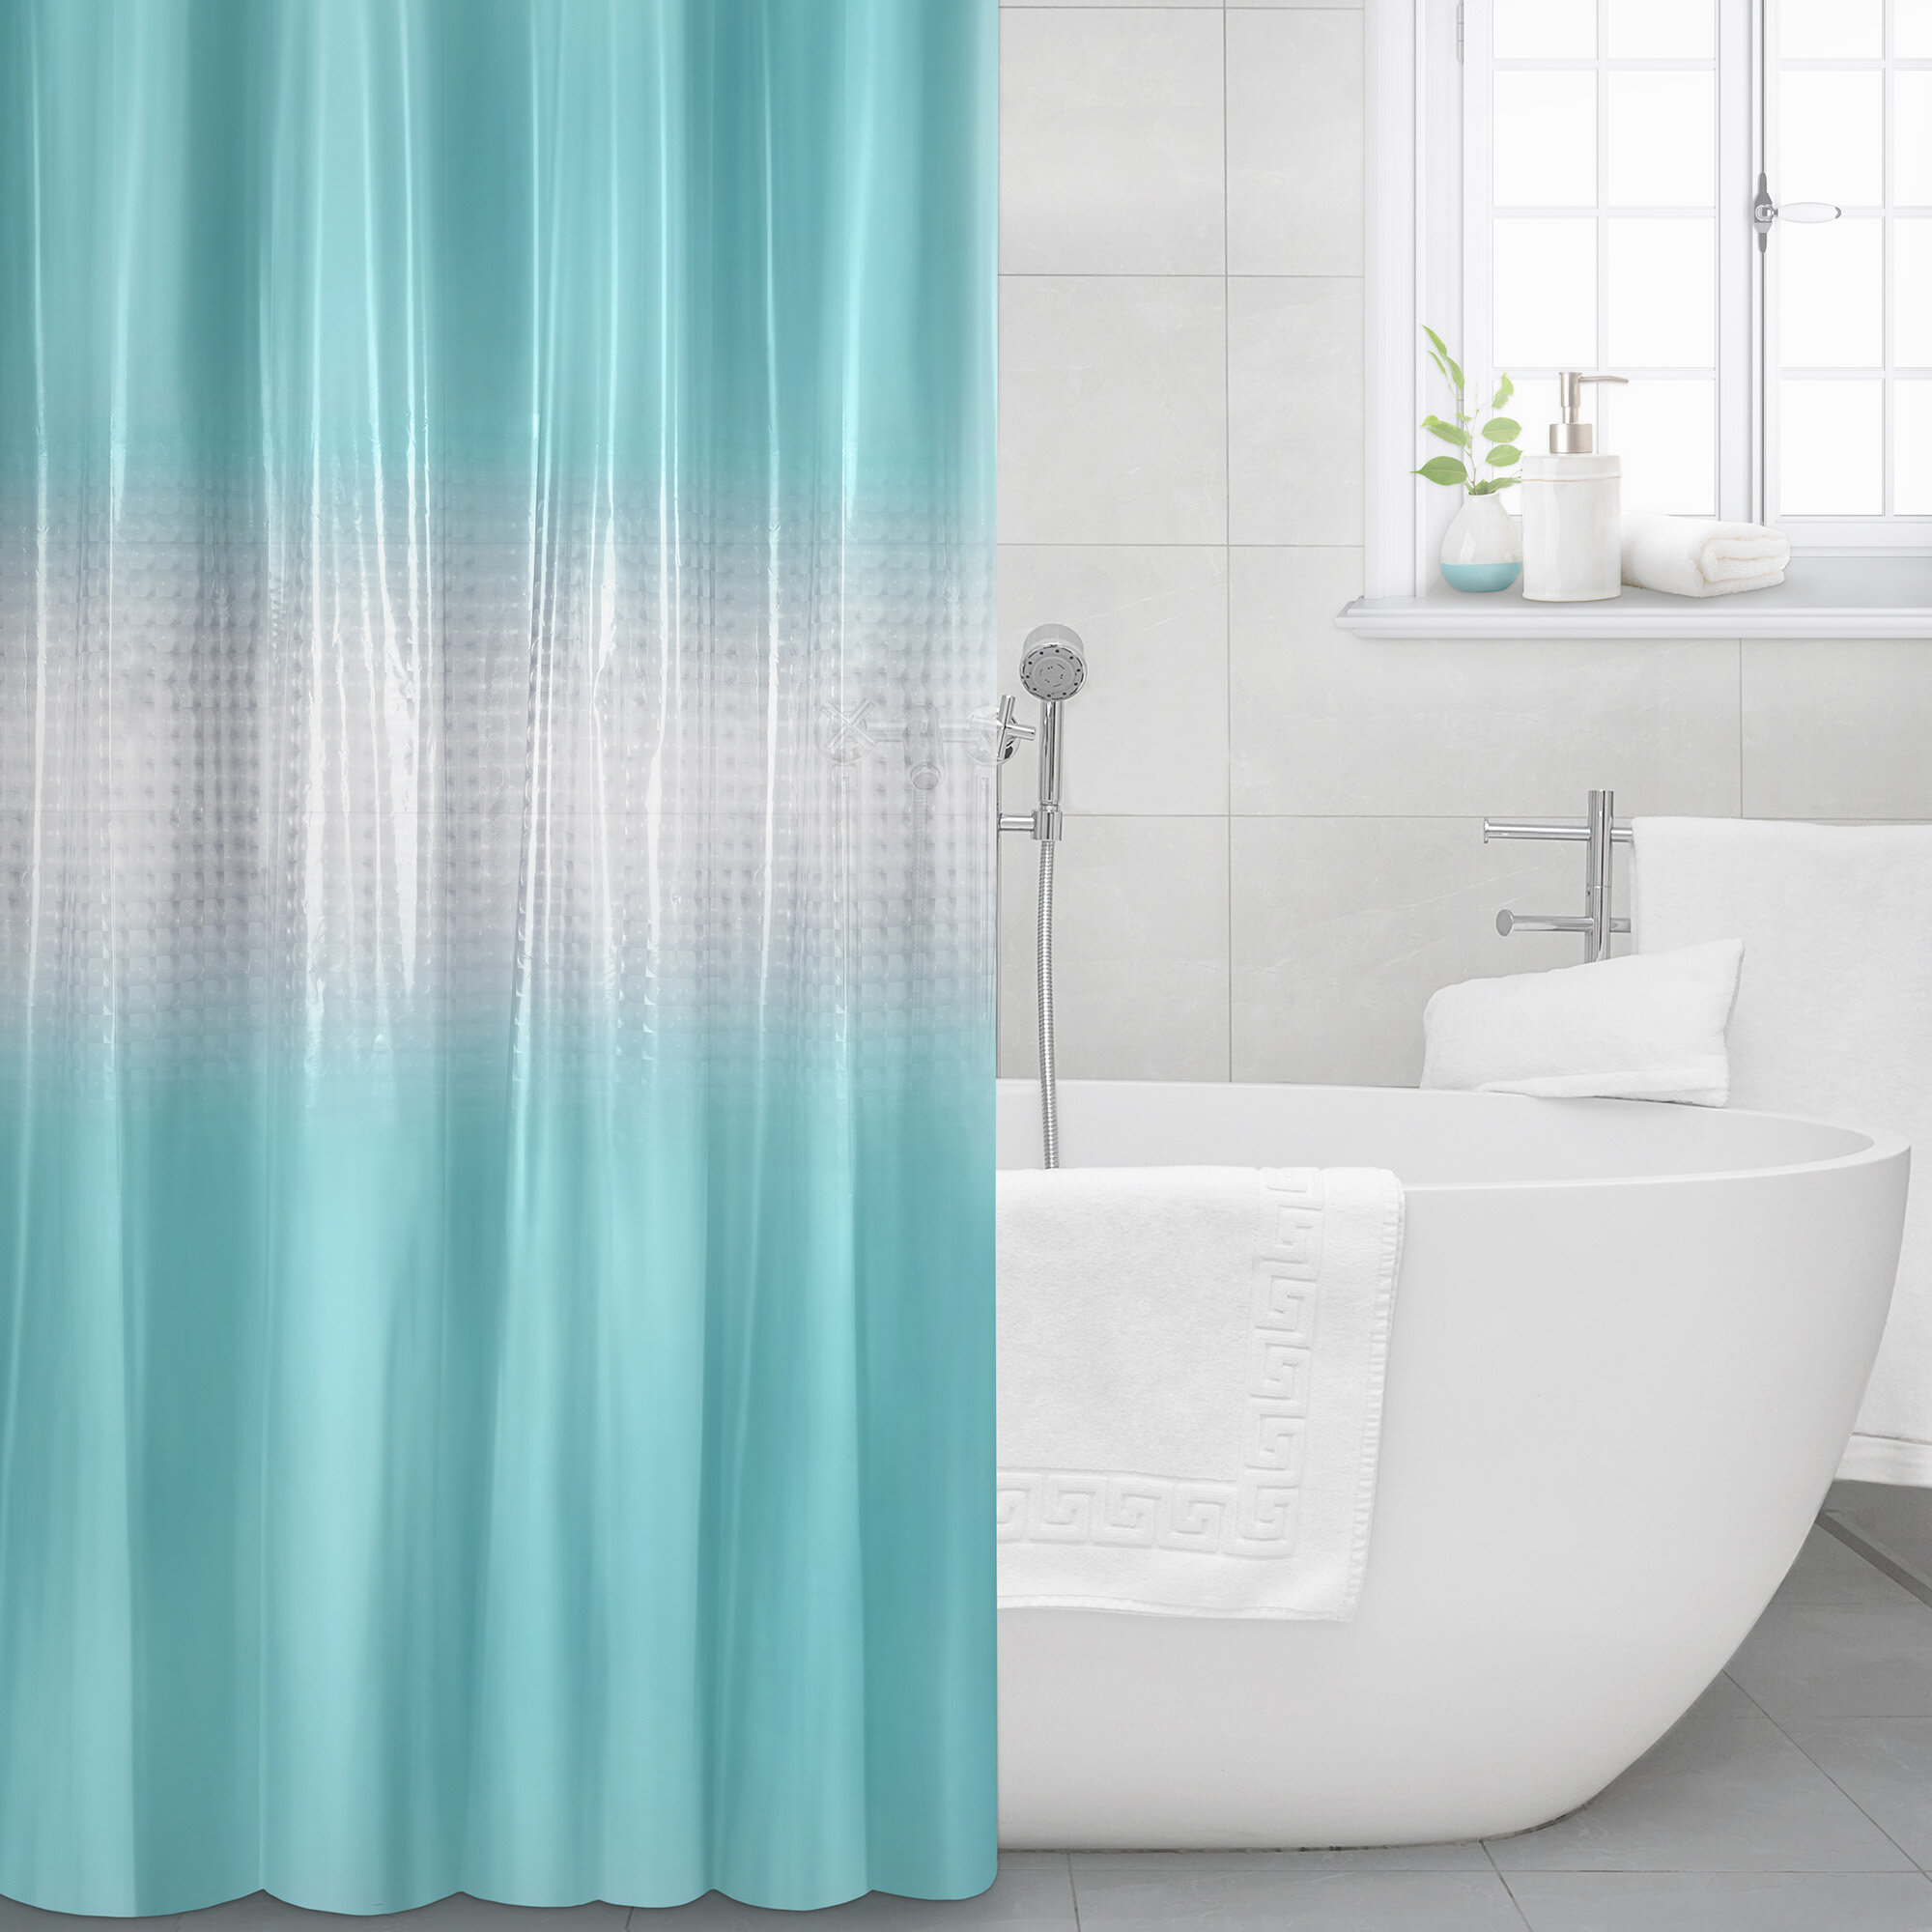 Details about   LORDTEX Ombre Textured Fabric Shower Curtains for Bathroom Waterproof Total Pr 